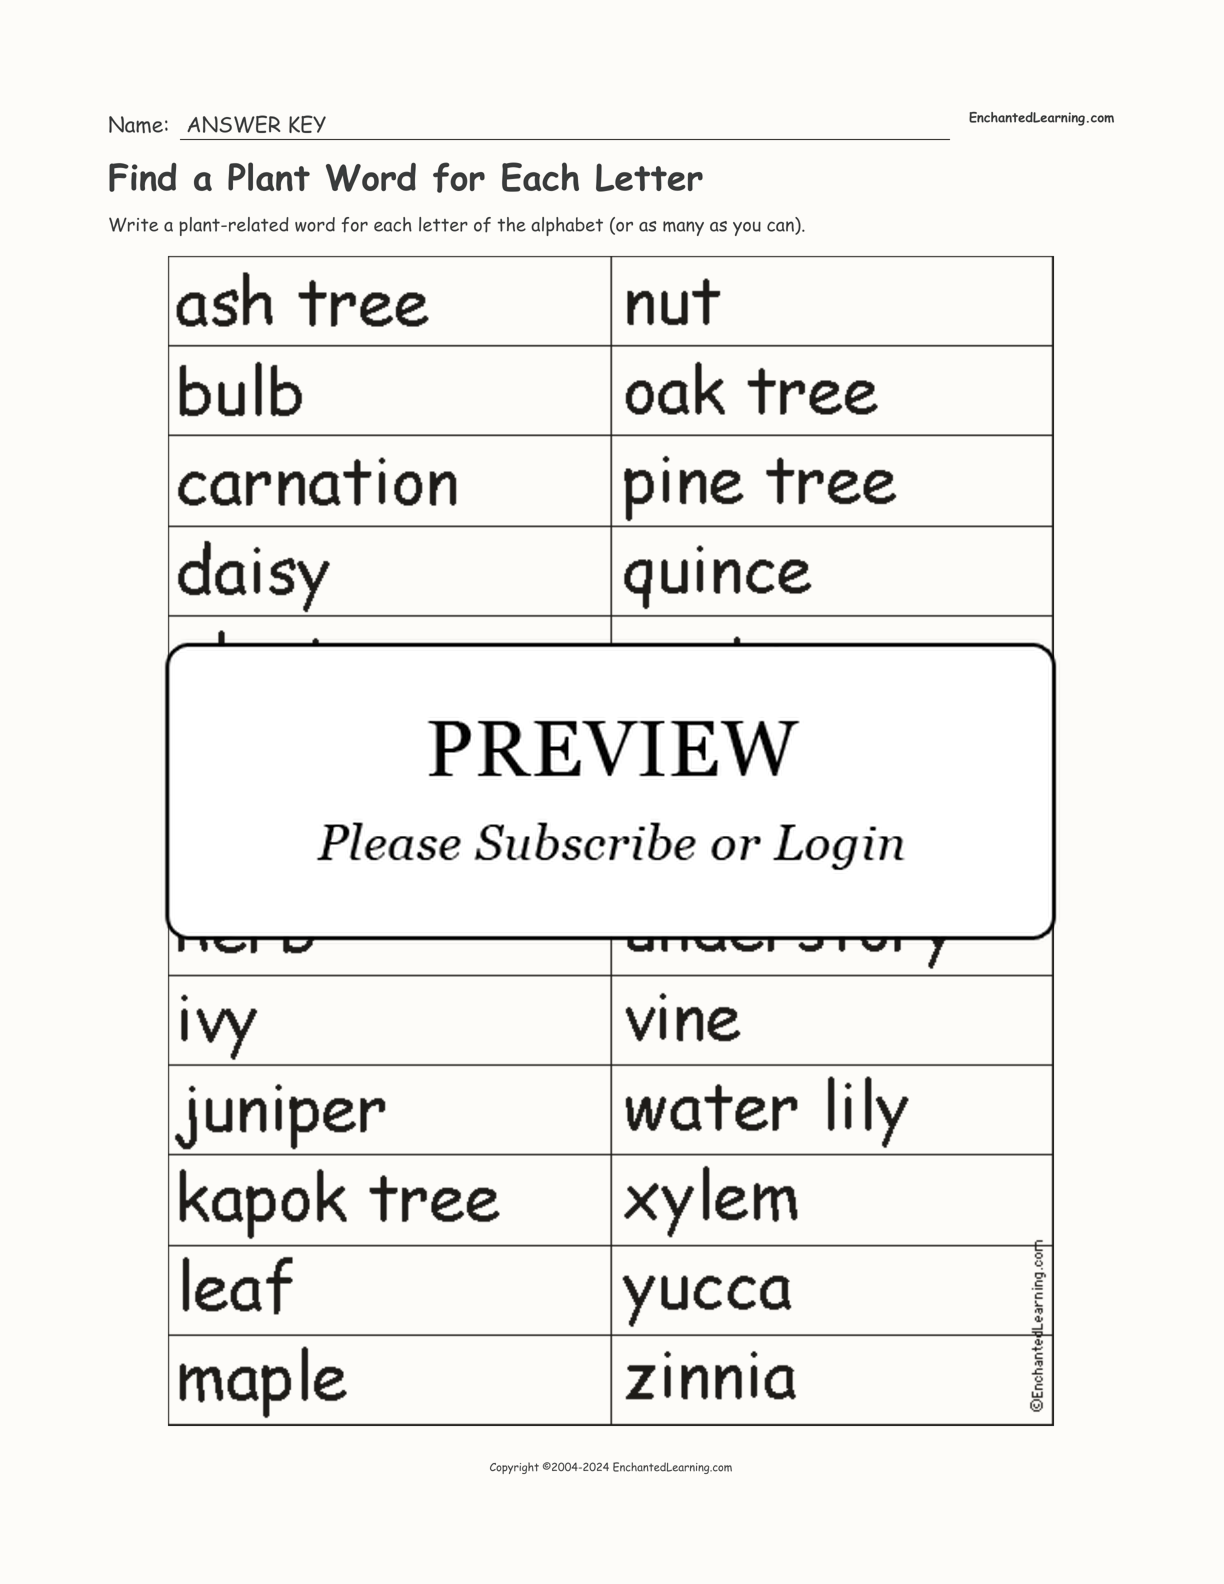 Find a Plant Word for Each Letter interactive worksheet page 2